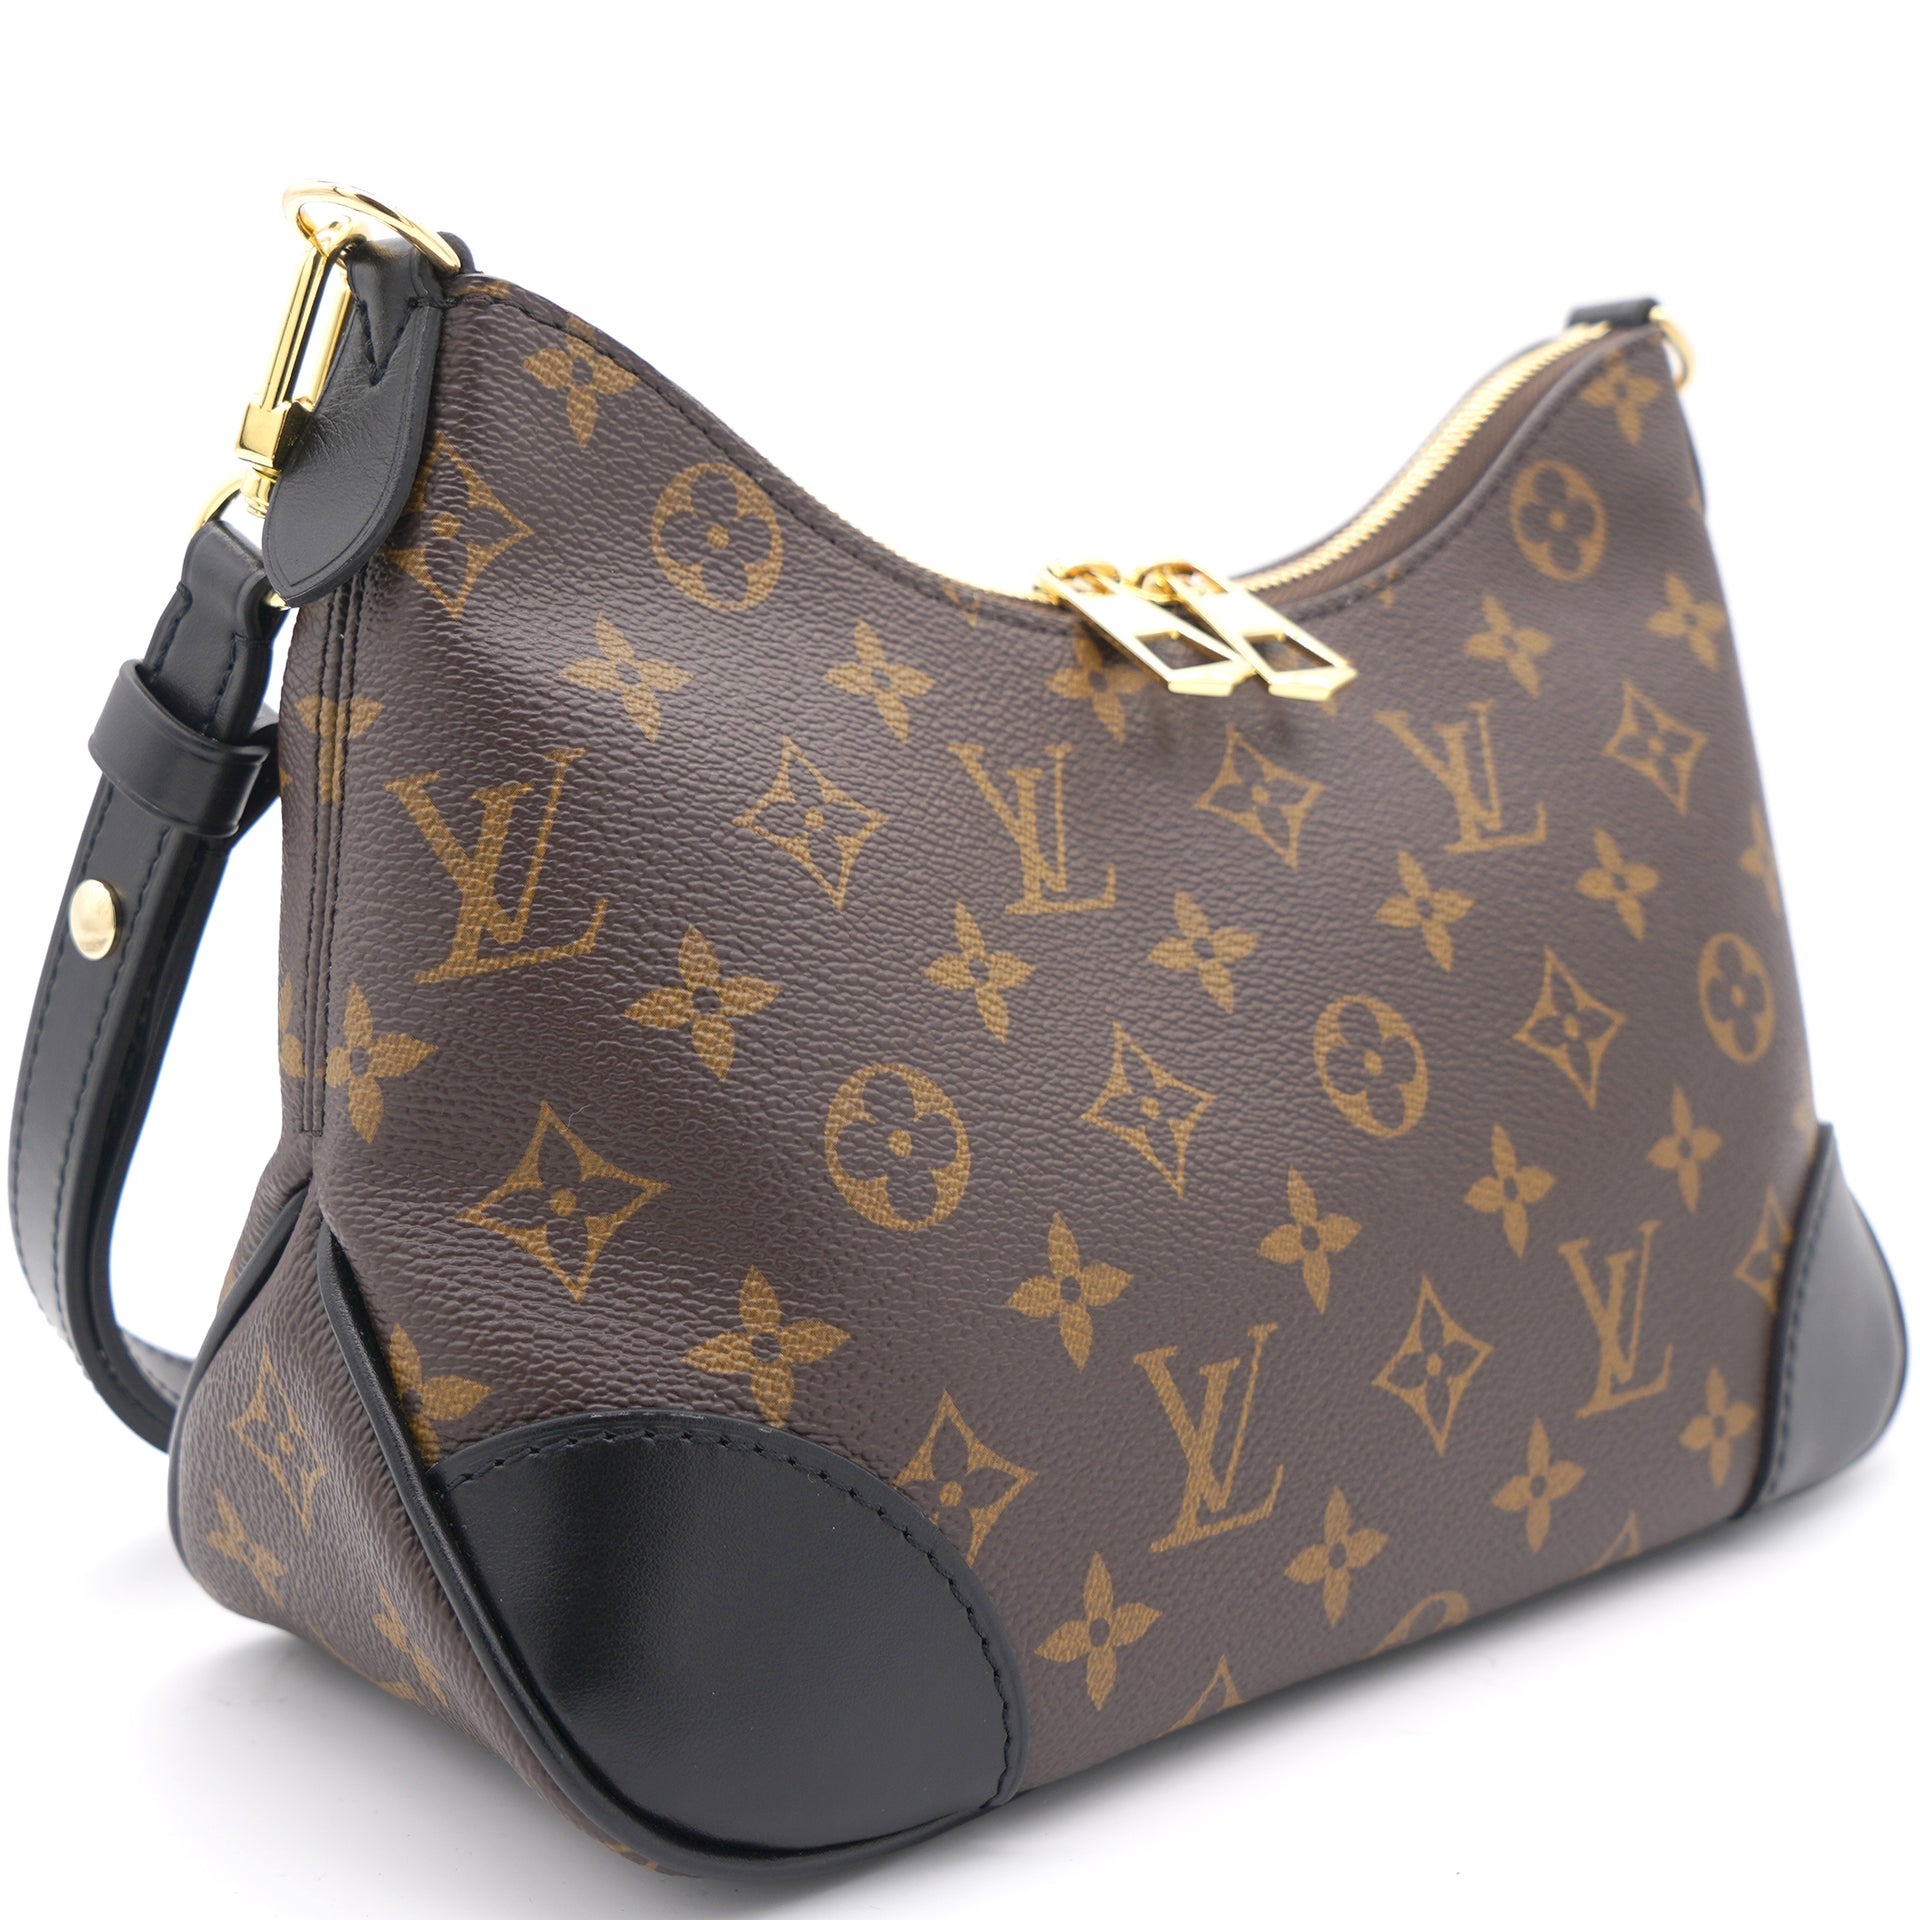 Boulogne rare leather crossbody bag Louis Vuitton Brown in Exotic